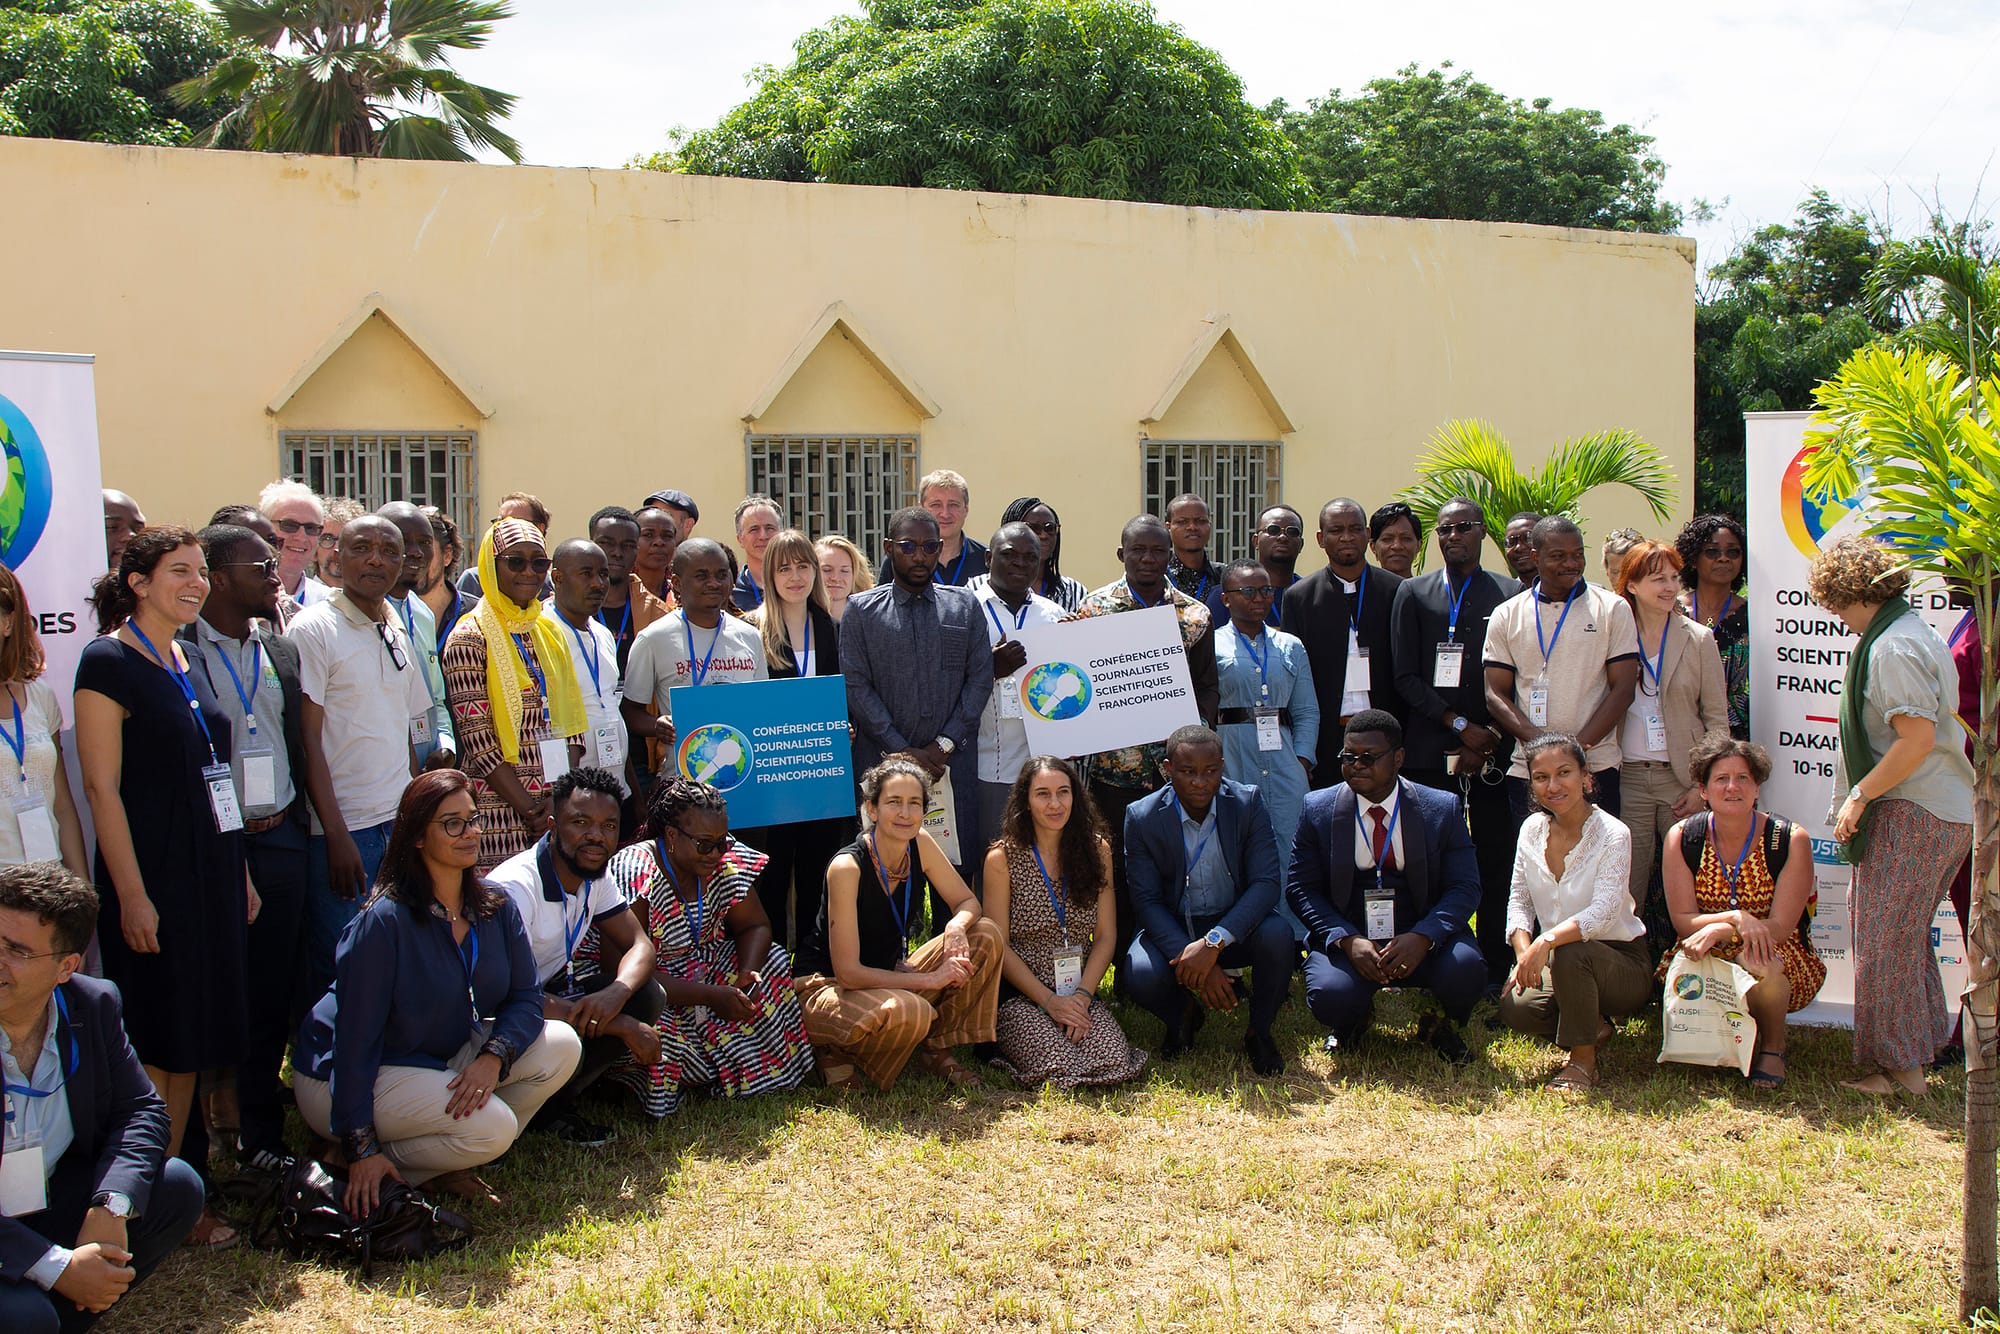 Group photo form the World Conference of Francophone Science Journalists